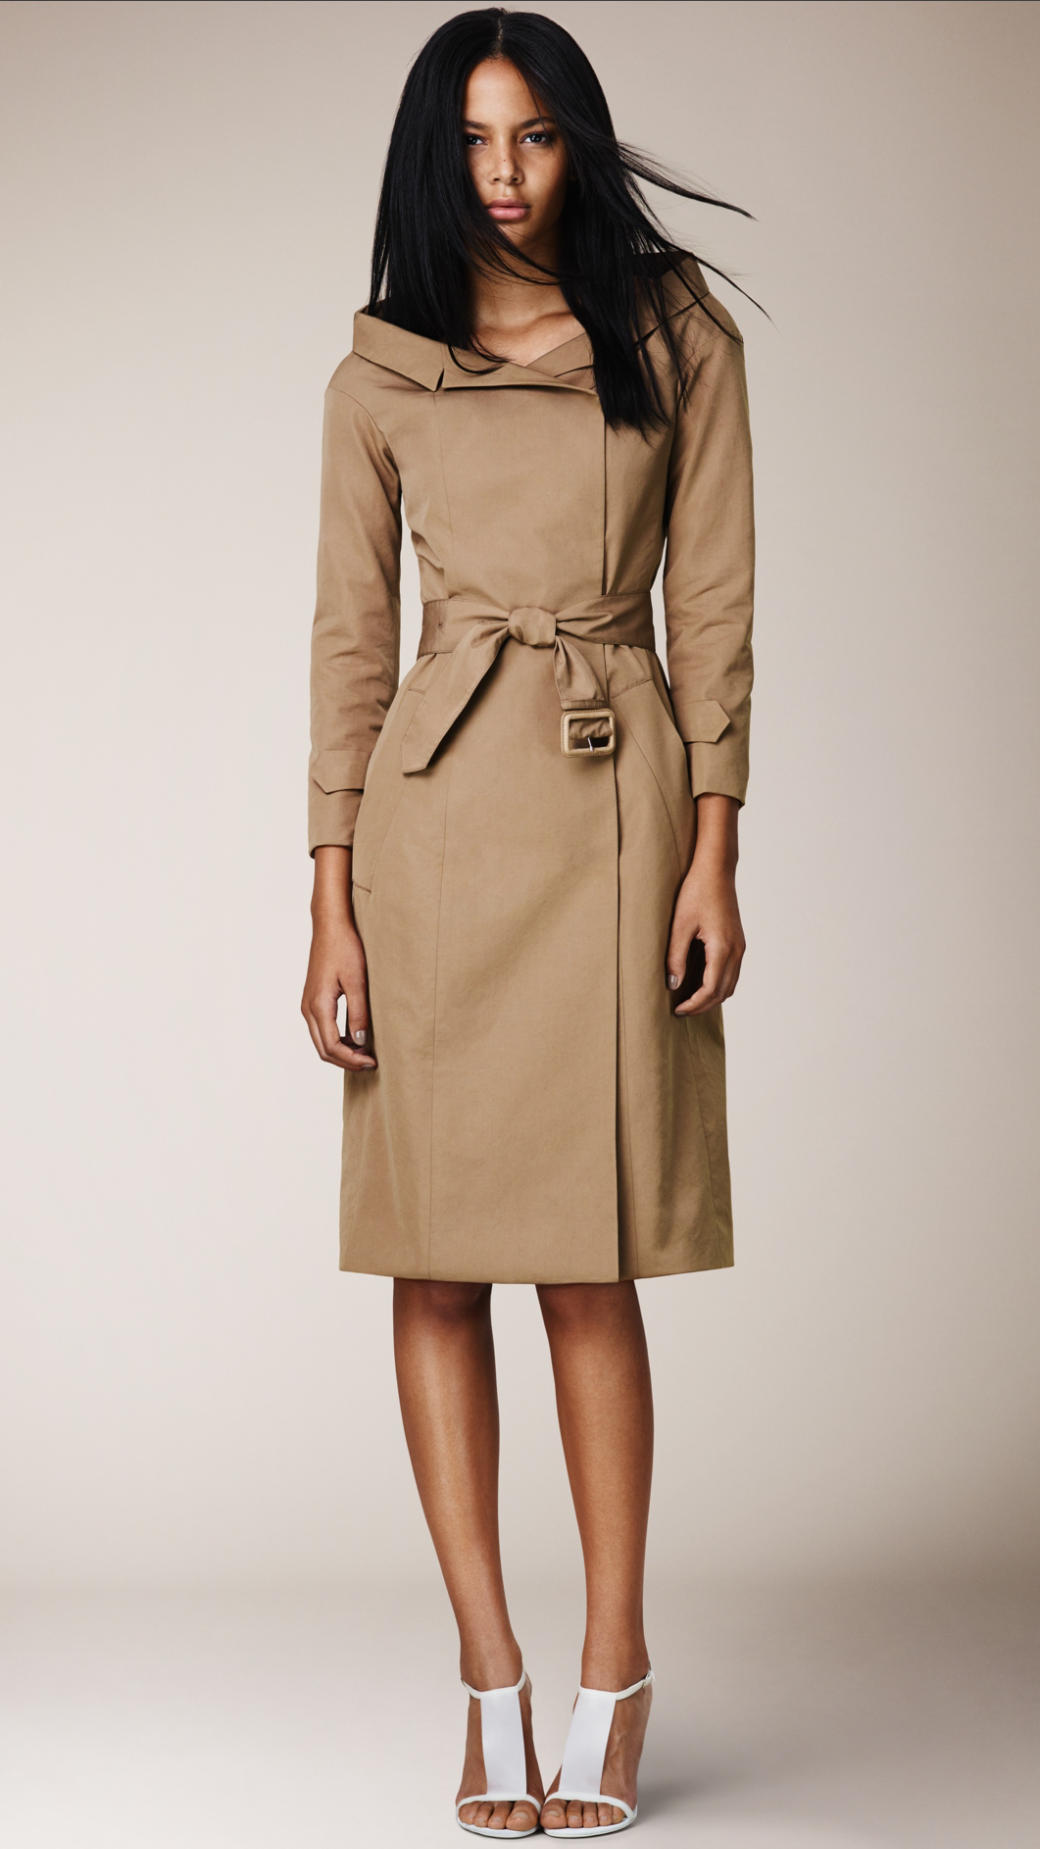 Burberry Portrait Neckline Trench Coat in Light Taupe Brown (Natural ...